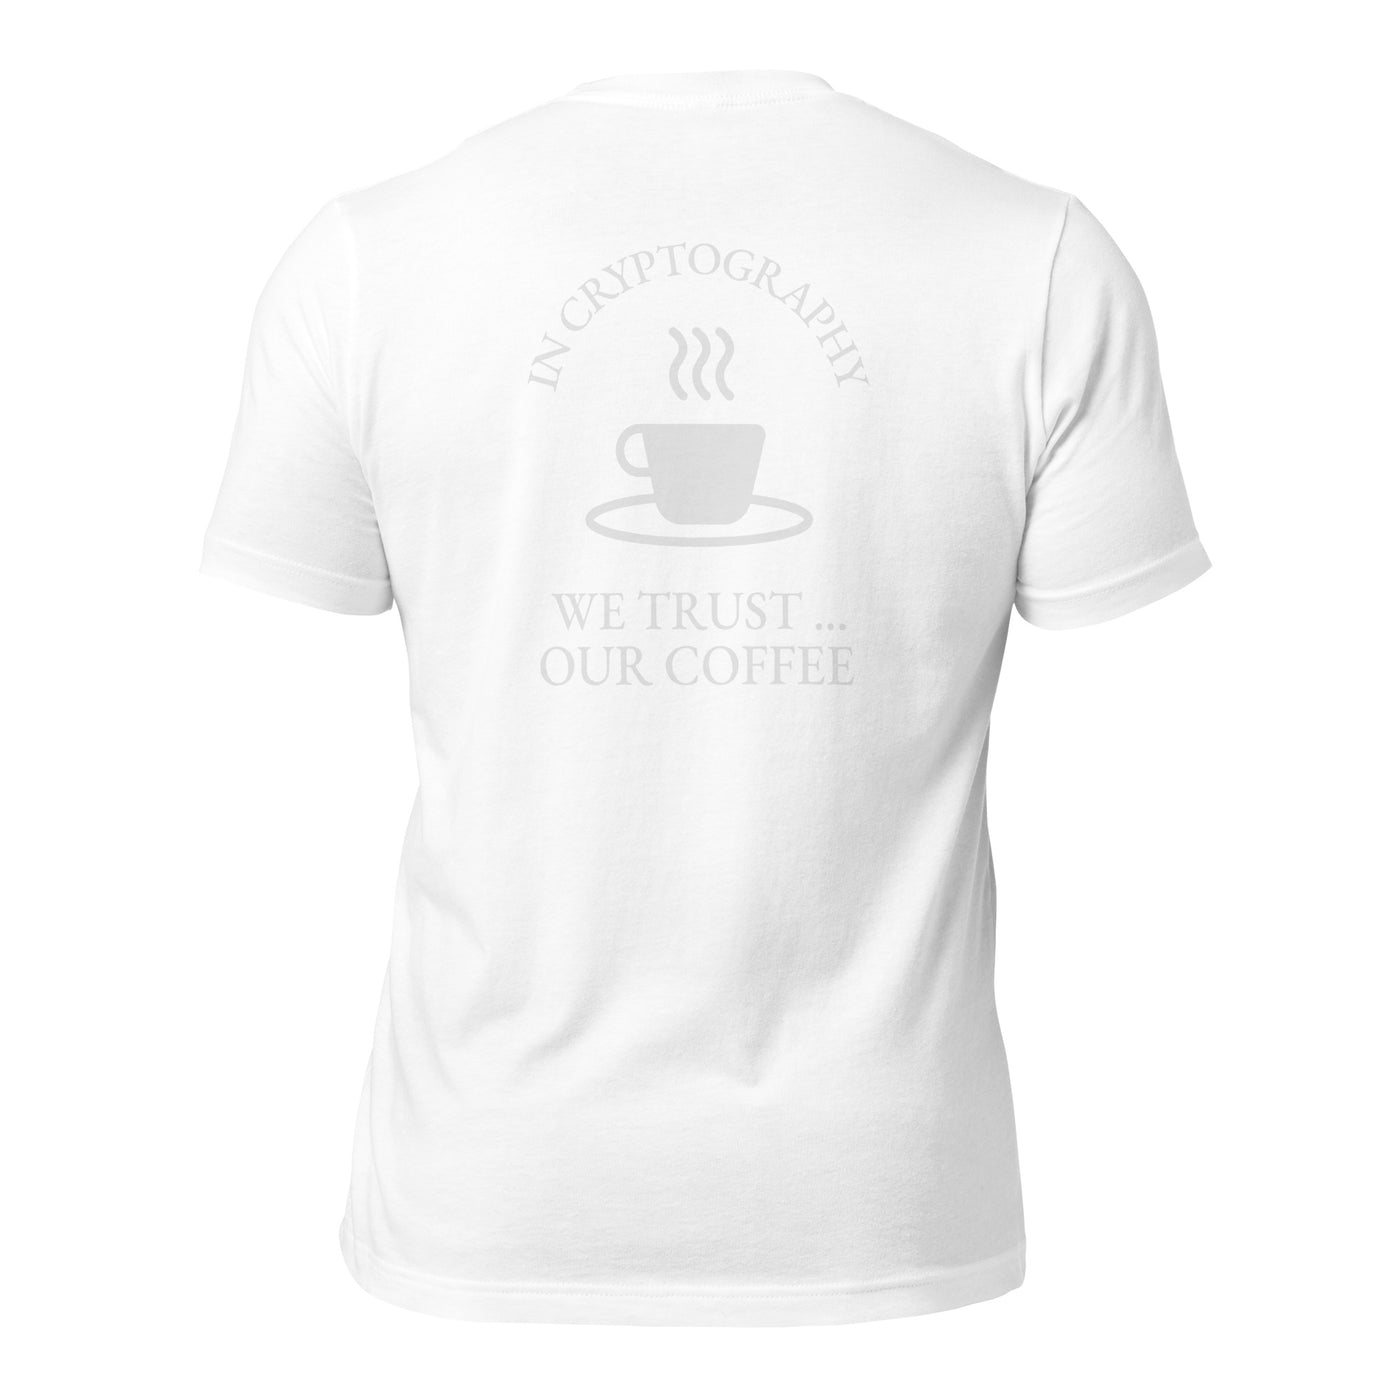 In cryptography, we trust... our coffee - Unisex t-shirt (back print)